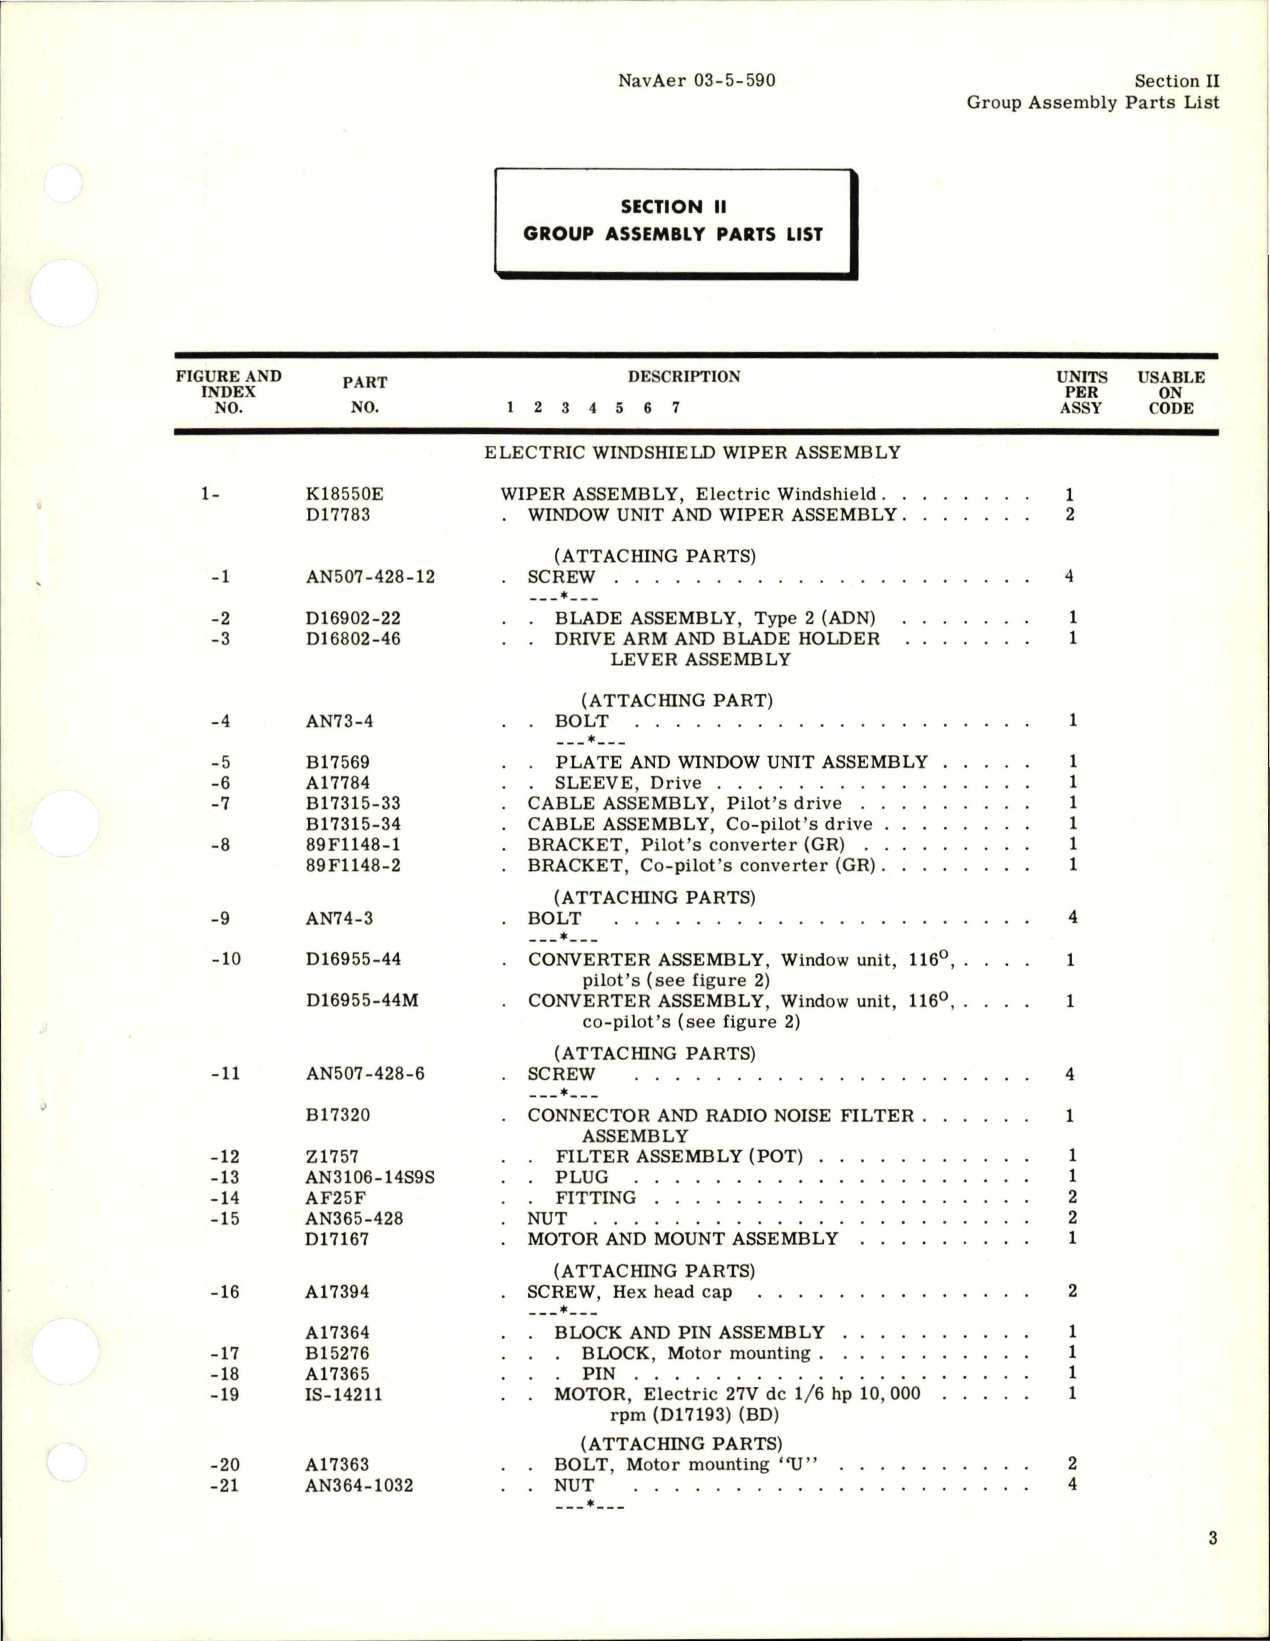 Sample page 5 from AirCorps Library document: Illustrated Parts Breakdown for Electric Windshield Wipers - Part K18550E 